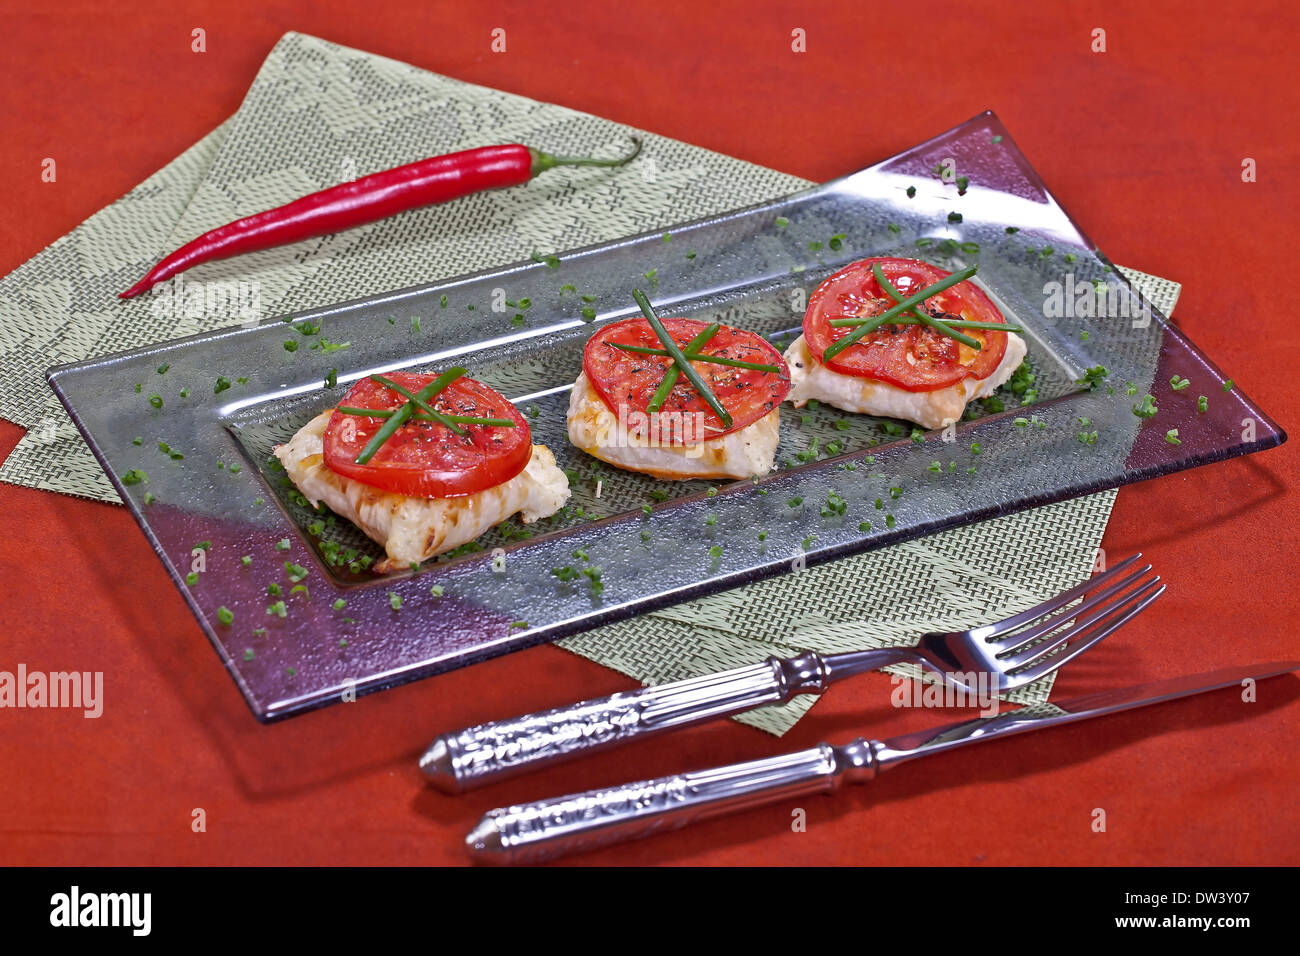 Puff pastry and grilled tomatoes Stock Photo